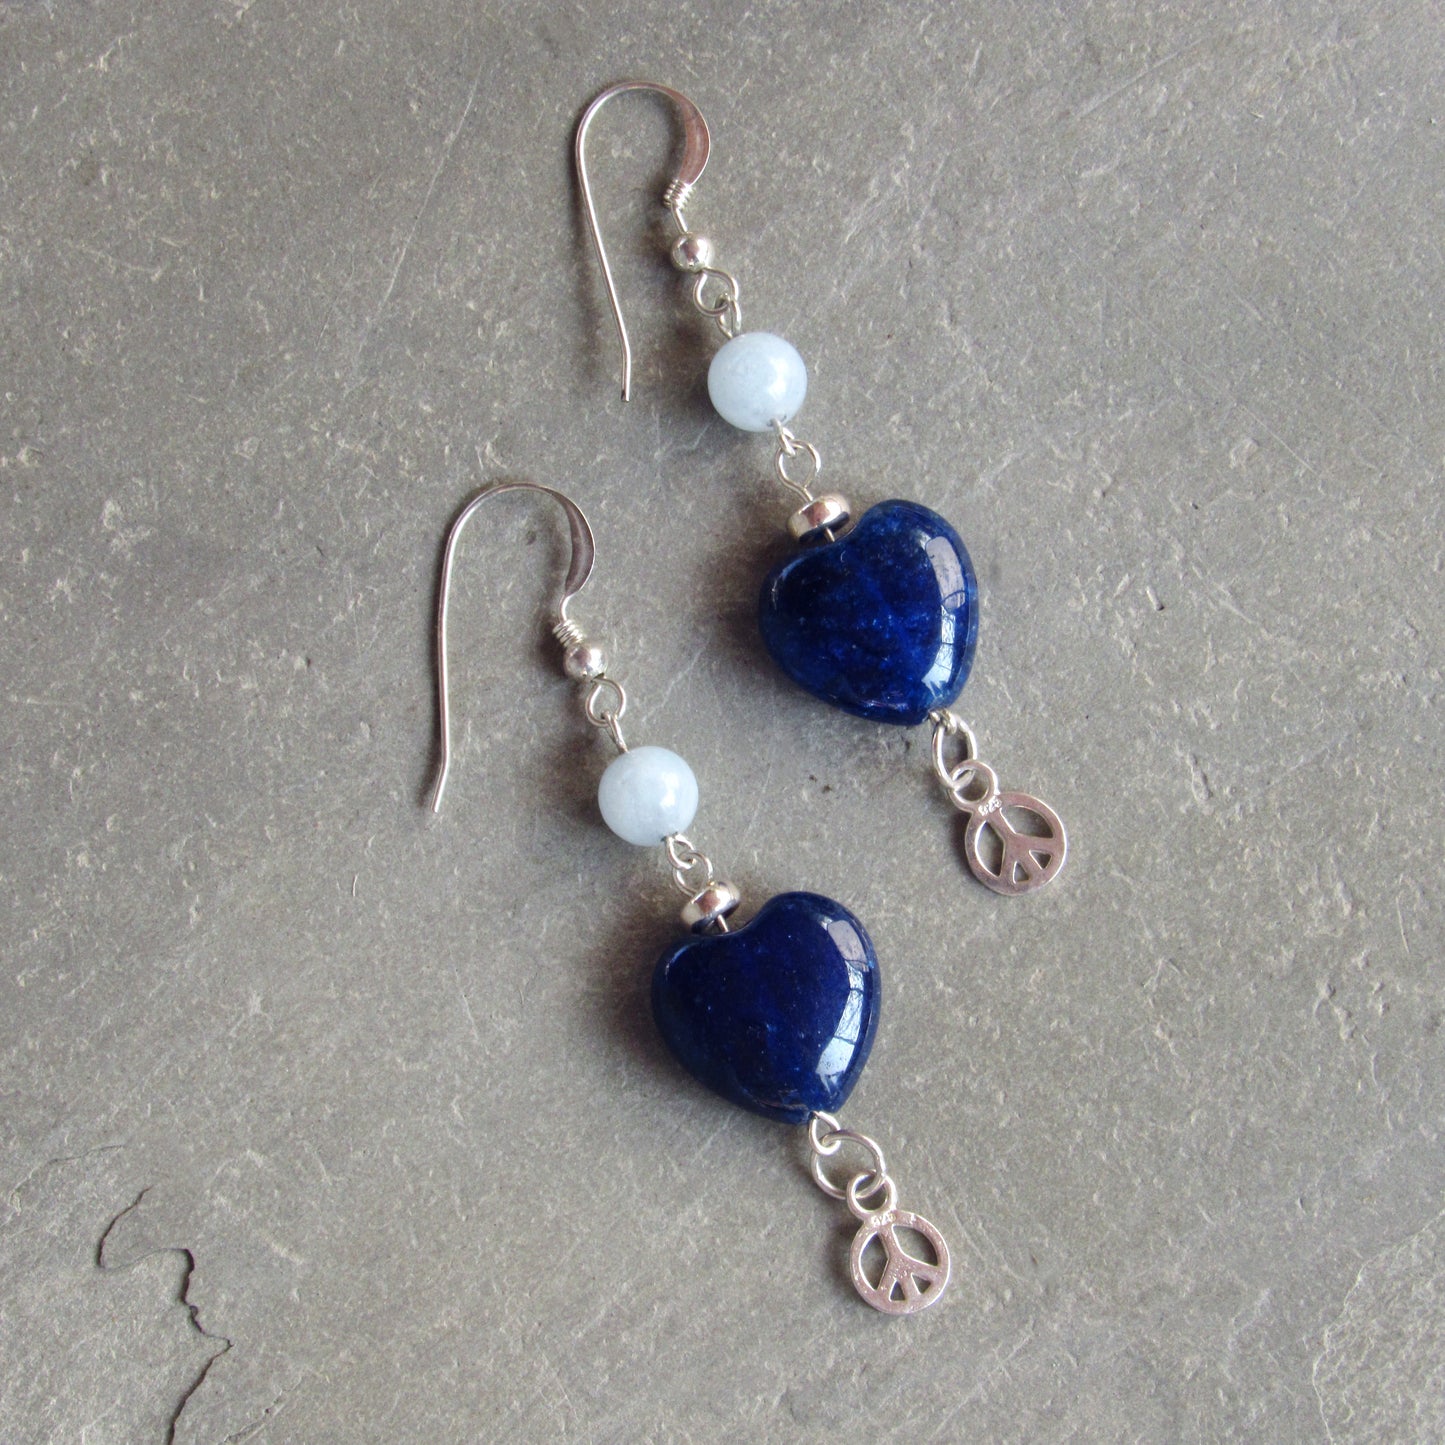 Blue Agate gemstone Hearts, Sterling Silver Peace Signs, Aquamarine, Sterling Silver Drop Earrings